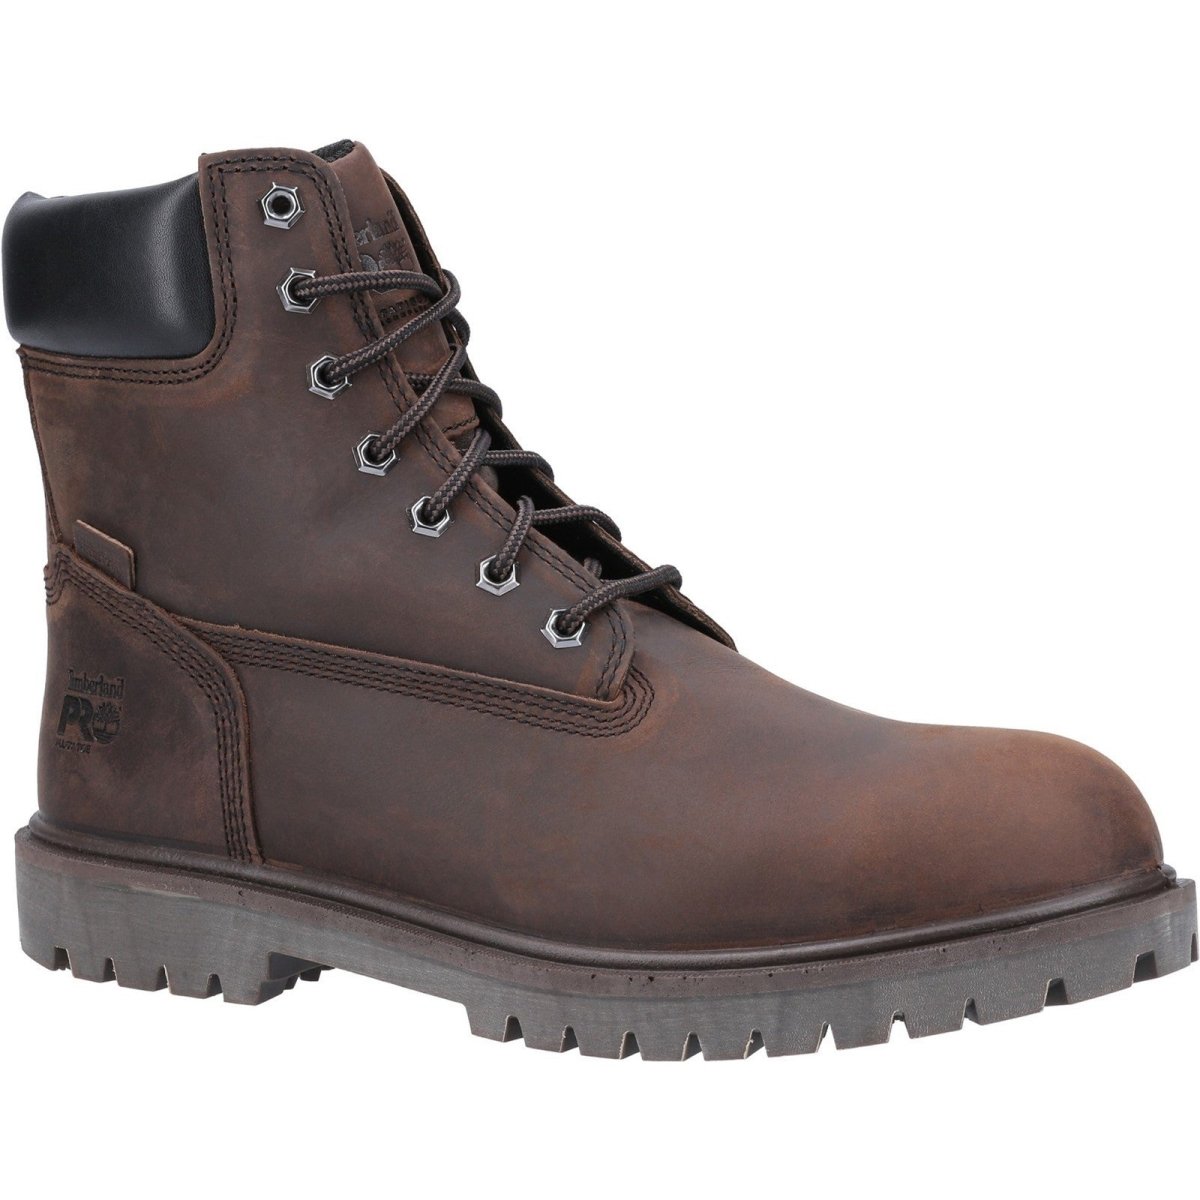 Timberland Pro Iconic Safety Toe Work Boot - Shoe Store Direct